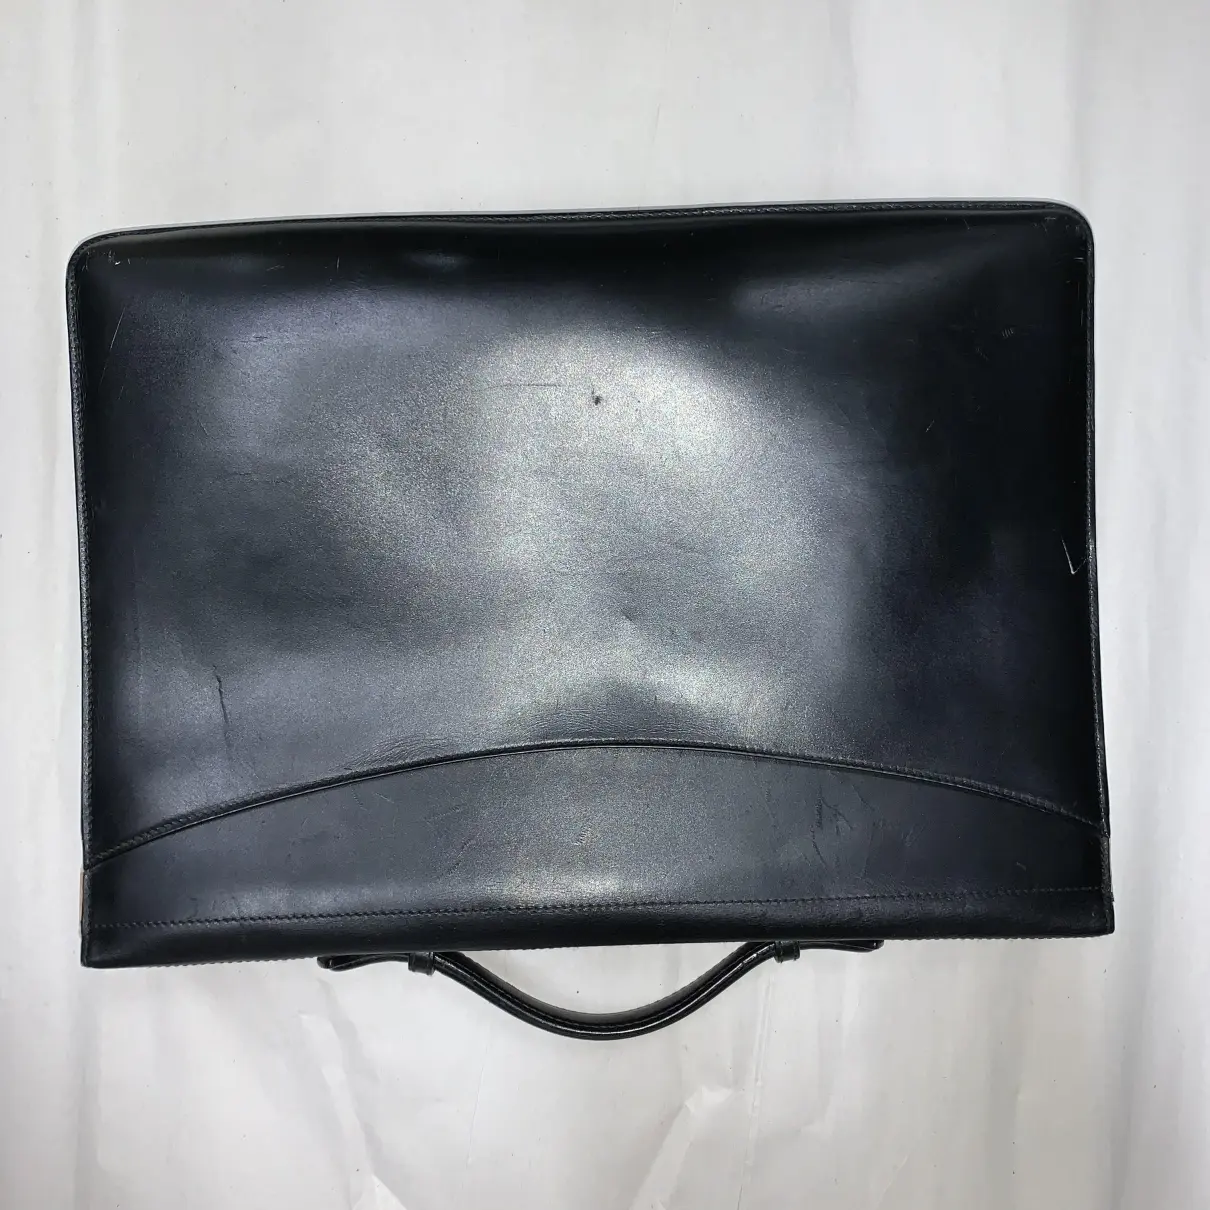 Buy Montblanc Leather bag online